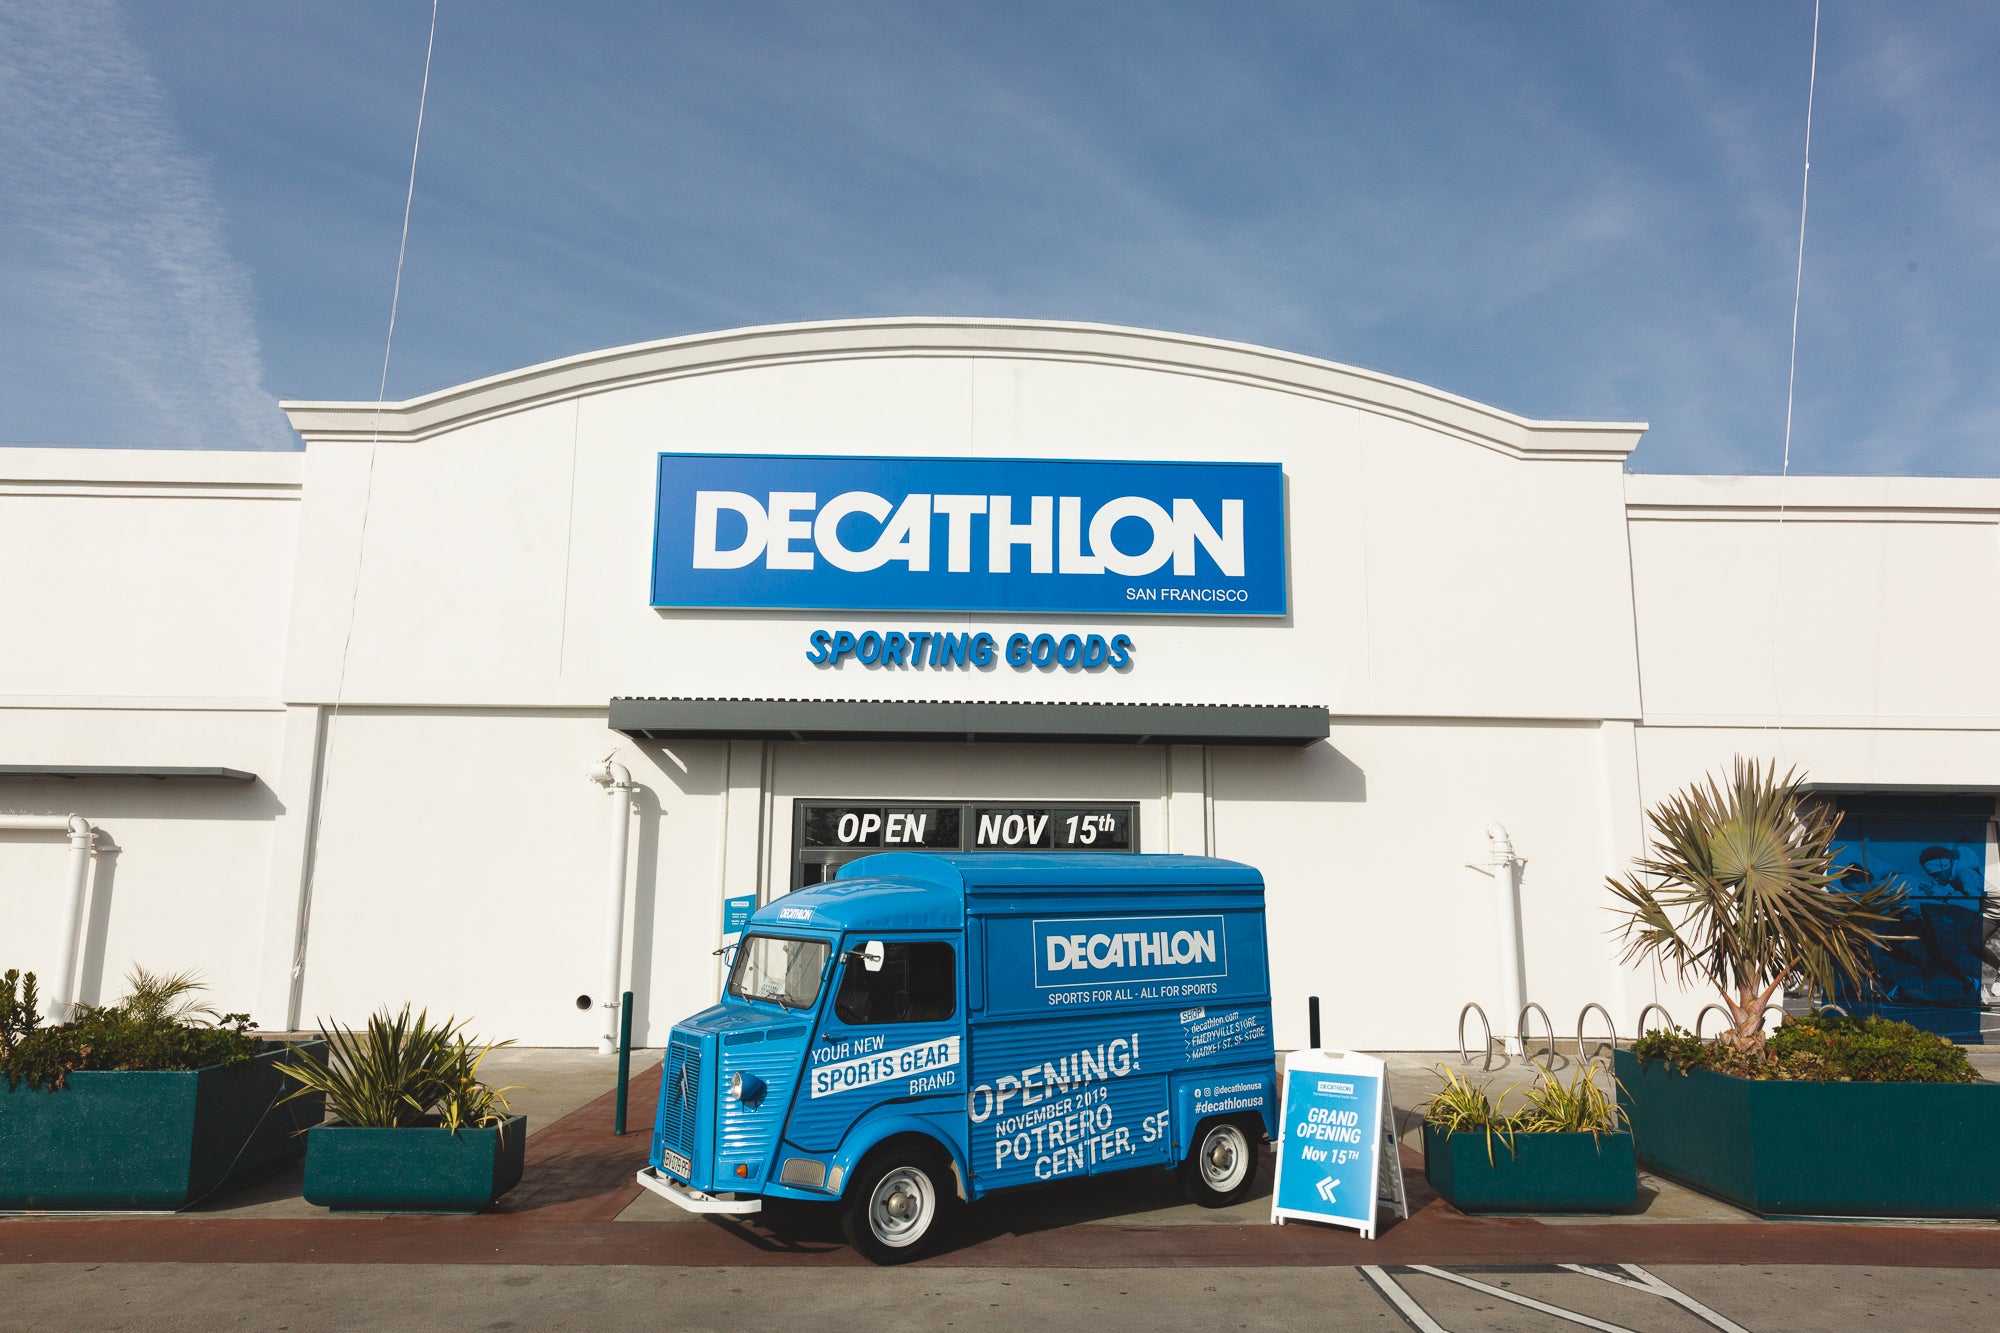 Sporting goods giant Decathlon taking another stab at US market